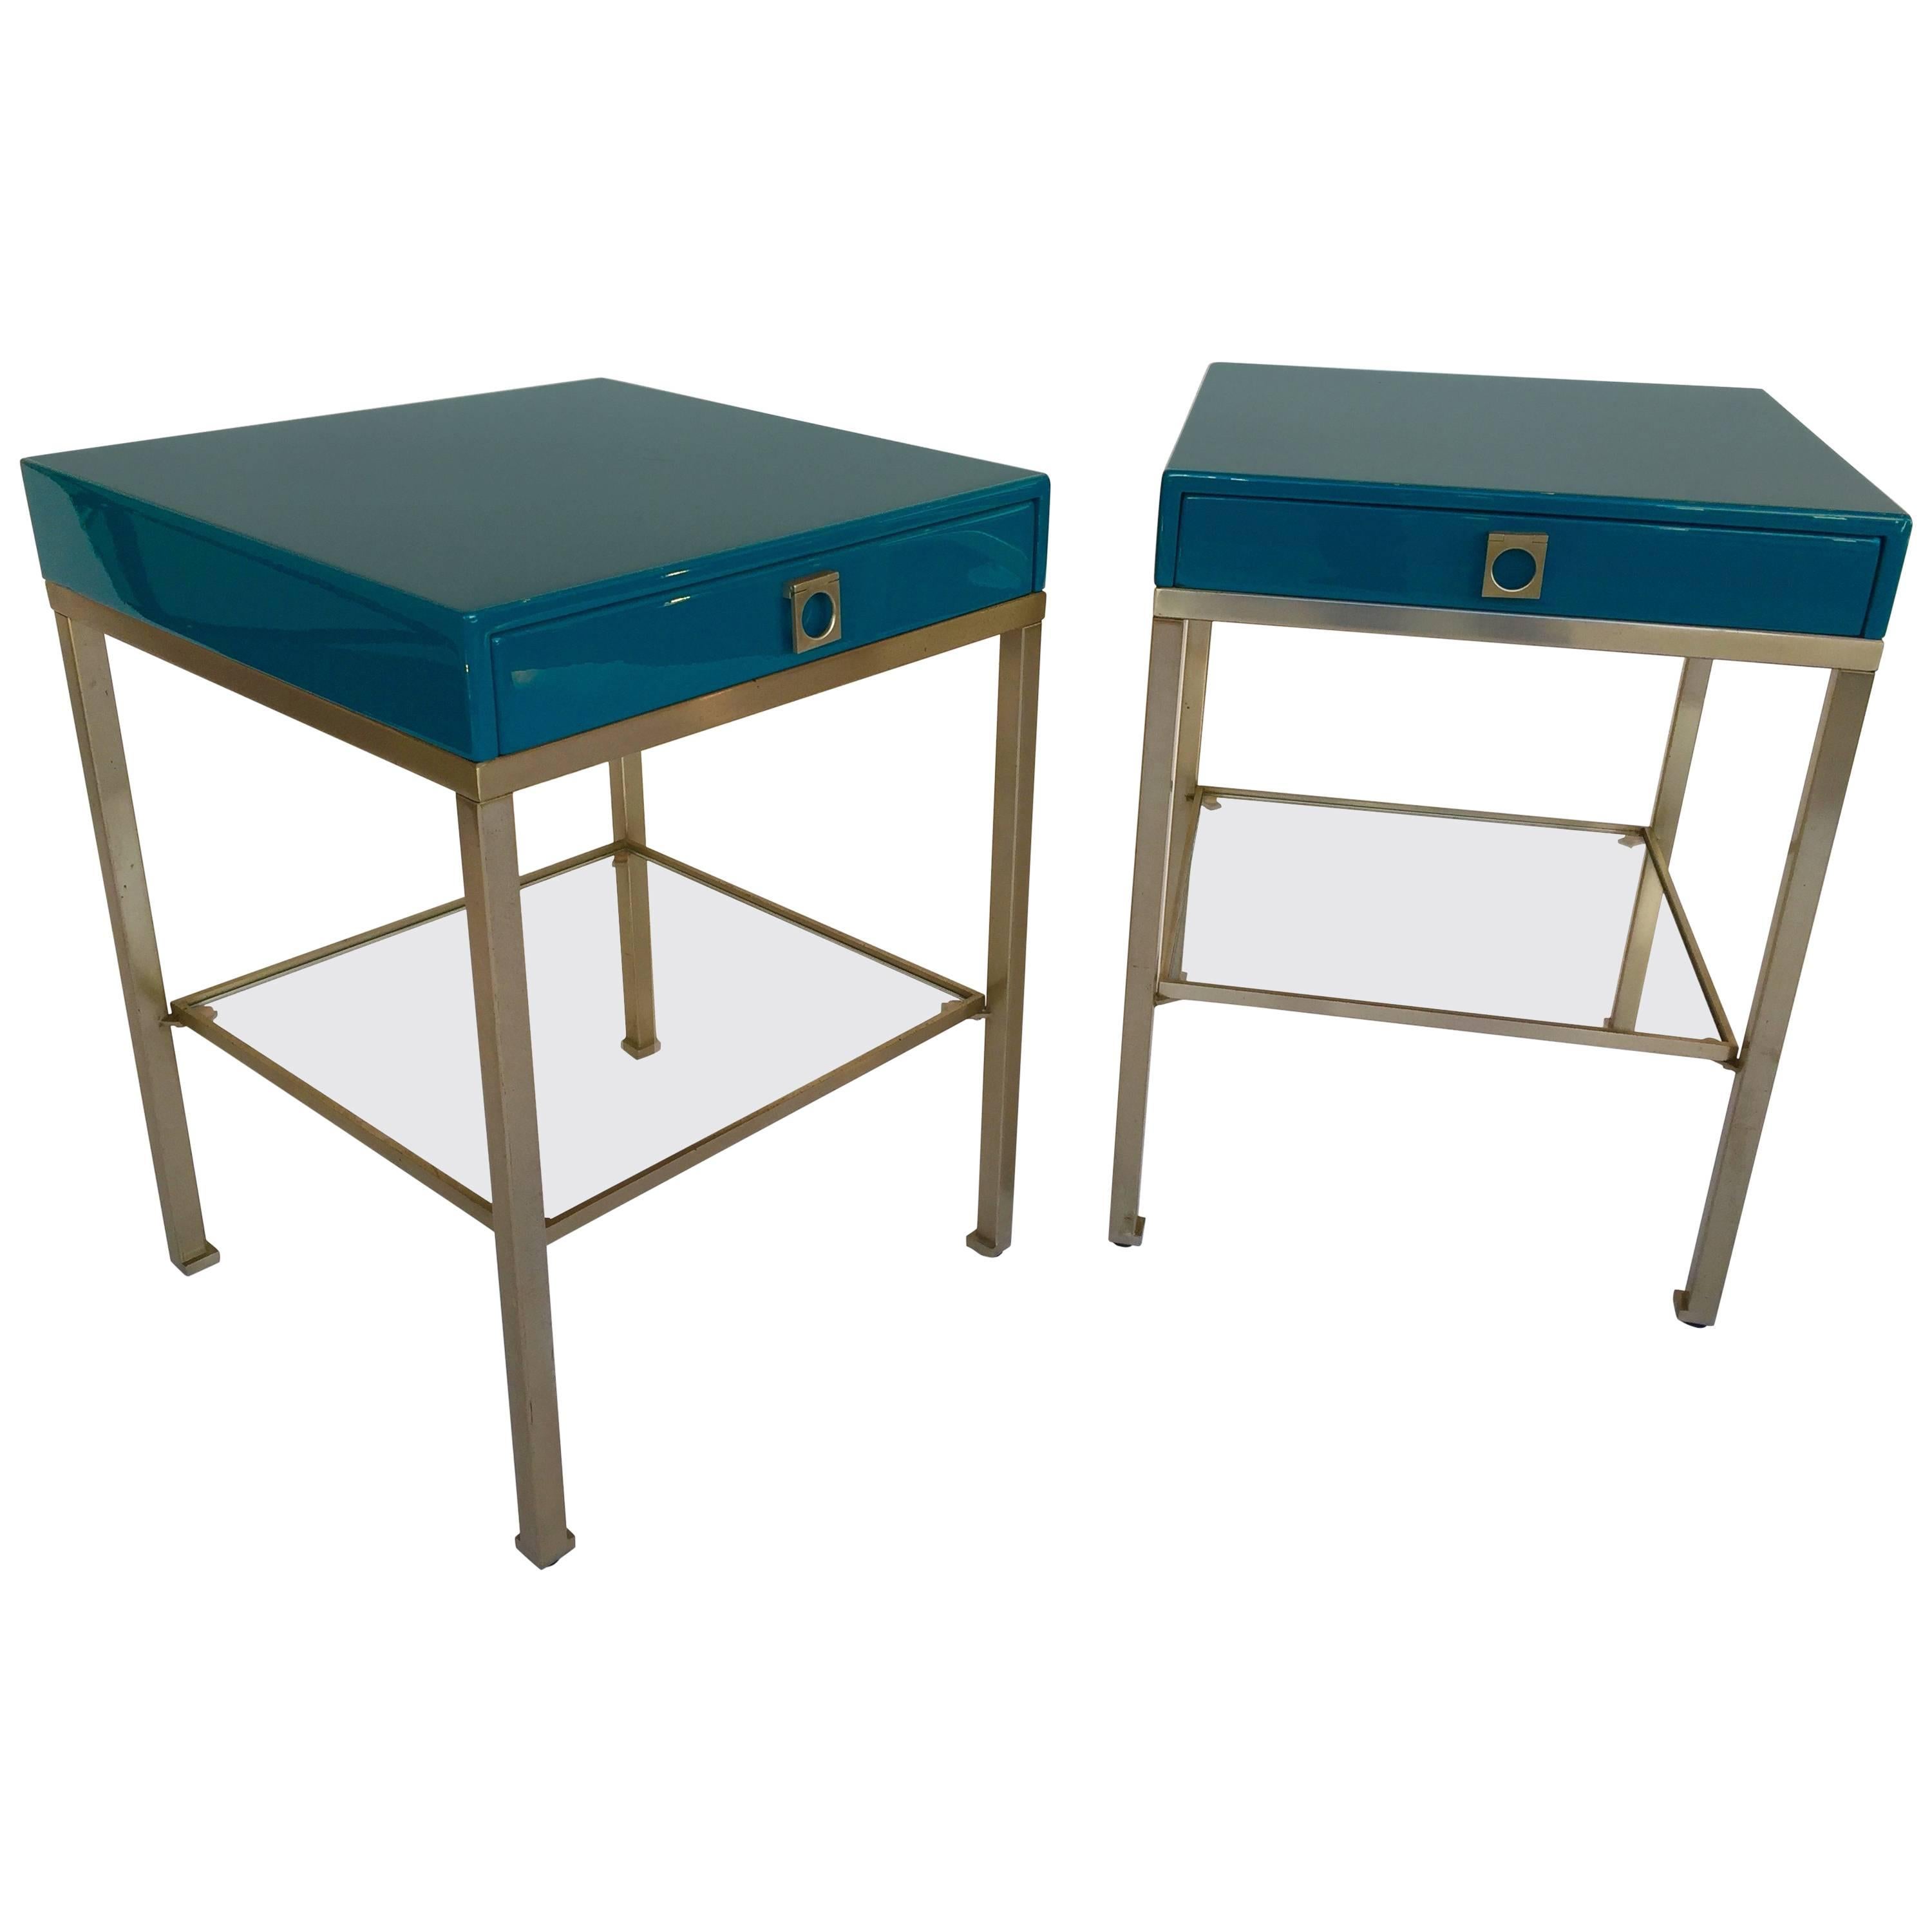 Pair of Lacquered Side Tables by Guy Lefevre for Maison Jansen, 1970s, France